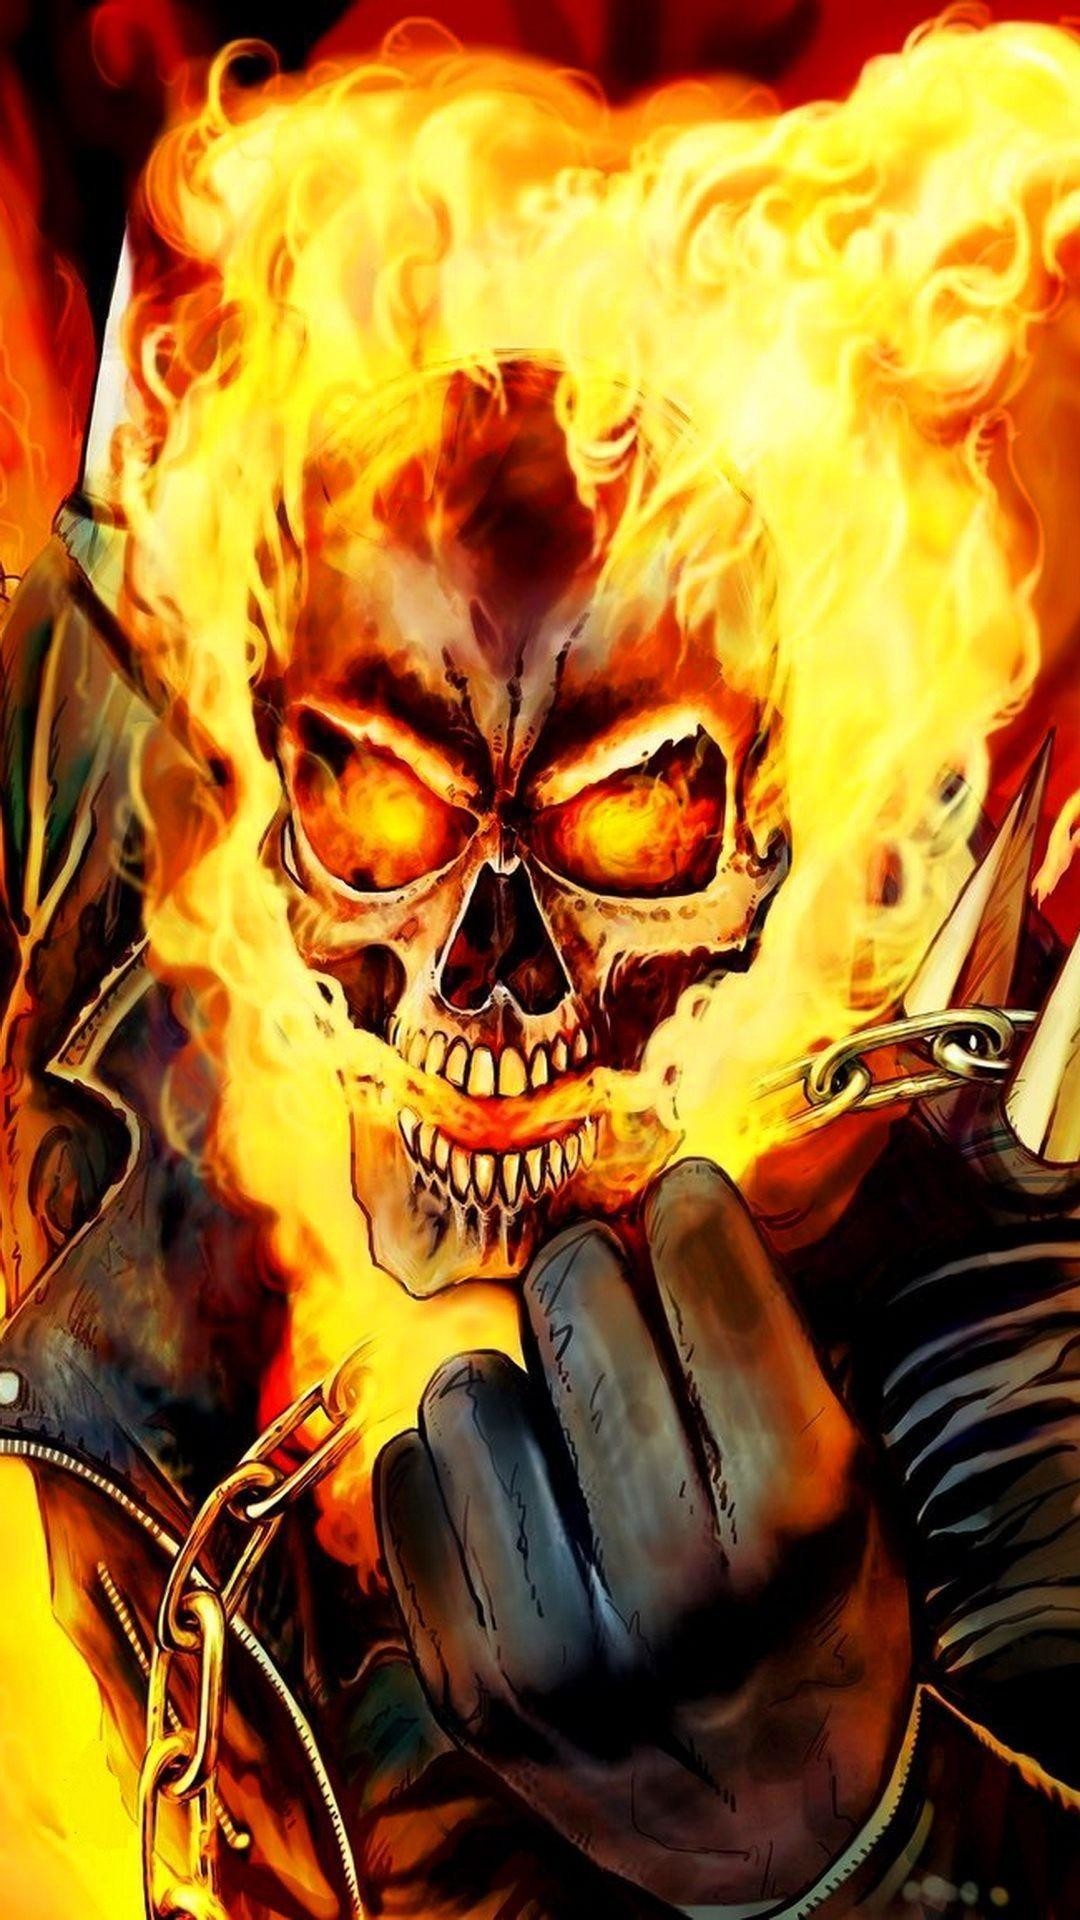 1080x1920 ghost rider iphone 6 plus wallpapers Items - Share ghost rider .